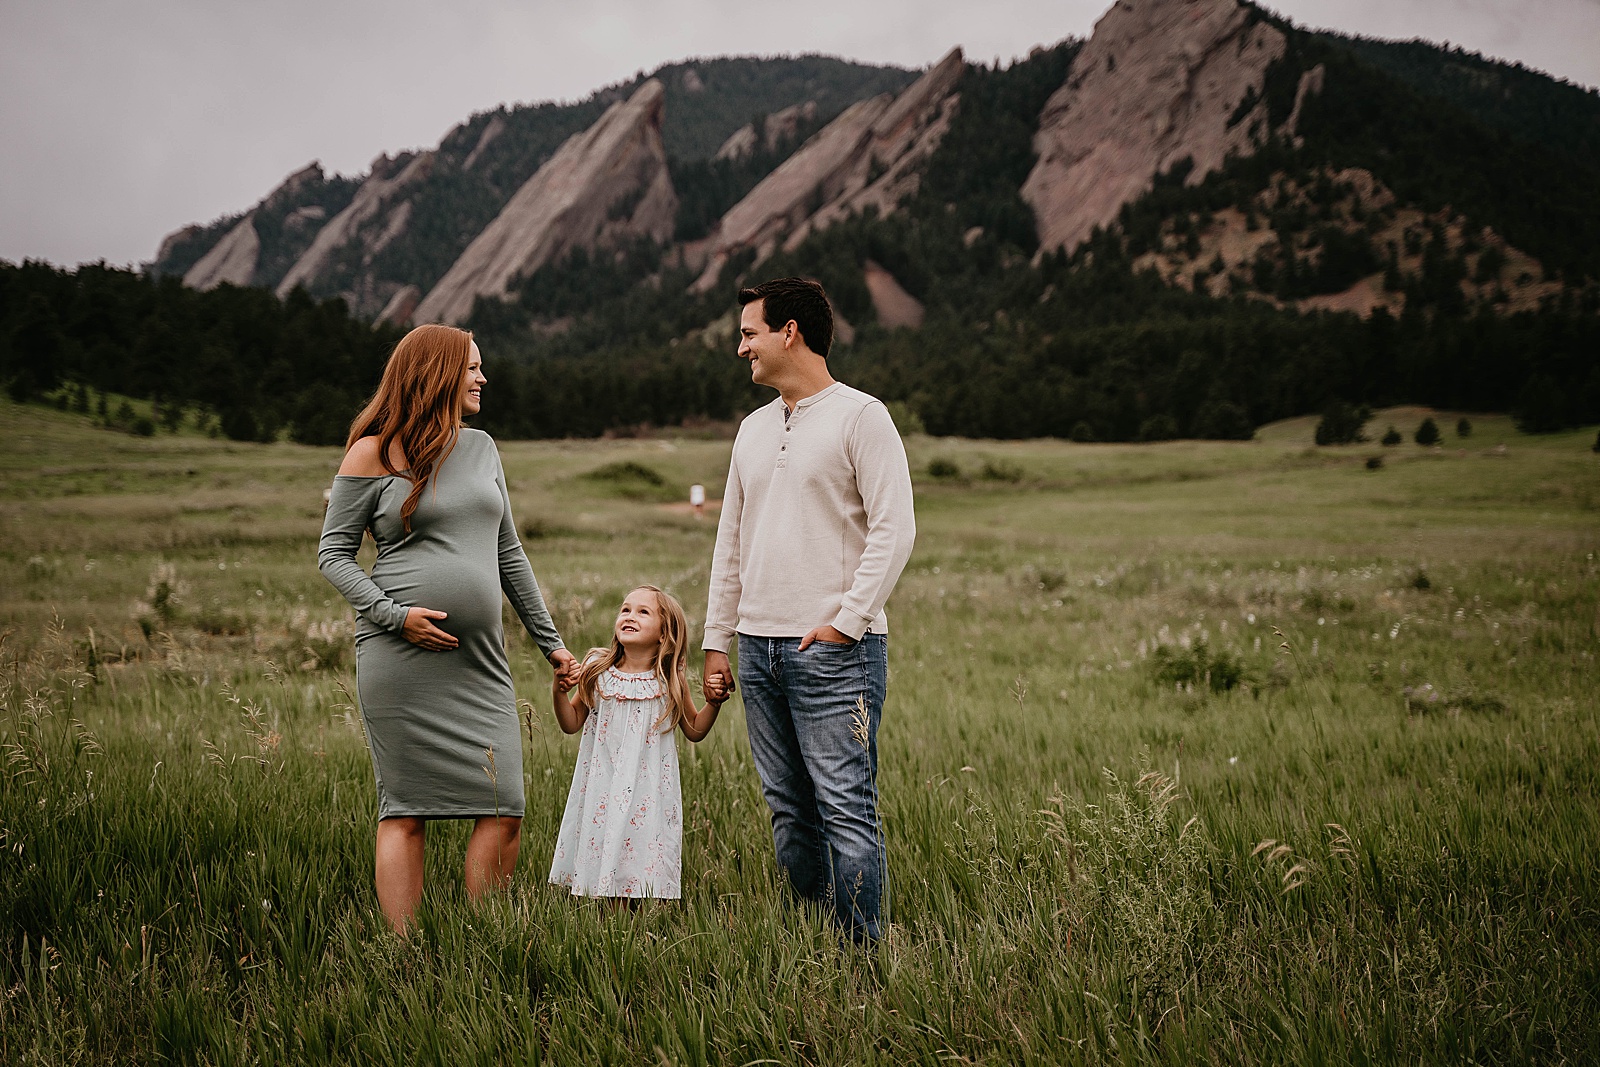 Colorado Mountain Maternity Session at Chitaqua Park captured by Destination Lifestyle Photographer, Krystal Capone Photography